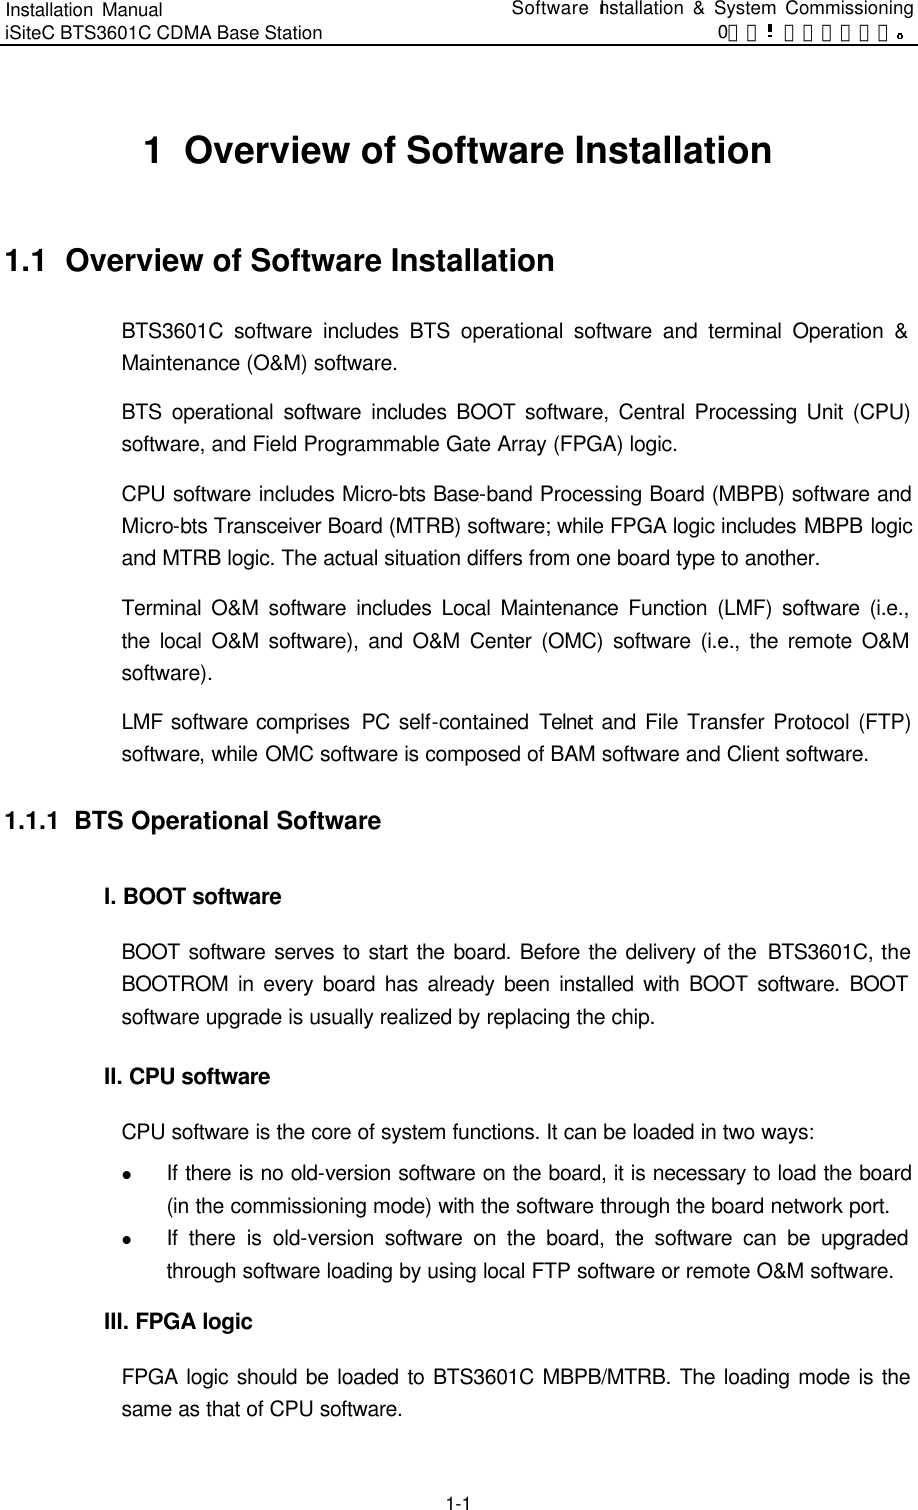 Installation Manual   iSiteC BTS3601C CDMA Base Station Software Installation &amp; System Commissioning 0错误 表格结果无效  1-1 1  Overview of Software Installation 1.1  Overview of Software Installation BTS3601C software includes BTS operational software and terminal Operation &amp; Maintenance (O&amp;M) software.   BTS operational software includes BOOT software, Central Processing Unit (CPU) software, and Field Programmable Gate Array (FPGA) logic.   CPU software includes Micro-bts Base-band Processing Board (MBPB) software and Micro-bts Transceiver Board (MTRB) software; while FPGA logic includes MBPB logic and MTRB logic. The actual situation differs from one board type to another.   Terminal O&amp;M software includes Local Maintenance Function (LMF) software (i.e., the local O&amp;M software), and O&amp;M Center (OMC) software (i.e., the remote O&amp;M software).   LMF software comprises  PC self-contained  Telnet  and File Transfer Protocol (FTP) software, while OMC software is composed of BAM software and Client software.   1.1.1  BTS Operational Software I. BOOT software BOOT software serves to start the board. Before the delivery of the  BTS3601C, the BOOTROM in every board has already been installed with BOOT software. BOOT software upgrade is usually realized by replacing the chip.   II. CPU software CPU software is the core of system functions. It can be loaded in two ways:   l If there is no old-version software on the board, it is necessary to load the board (in the commissioning mode) with the software through the board network port.   l If there is old-version software on the board, the software can be upgraded through software loading by using local FTP software or remote O&amp;M software.   III. FPGA logic FPGA logic should be loaded to BTS3601C MBPB/MTRB. The loading mode is the same as that of CPU software.   